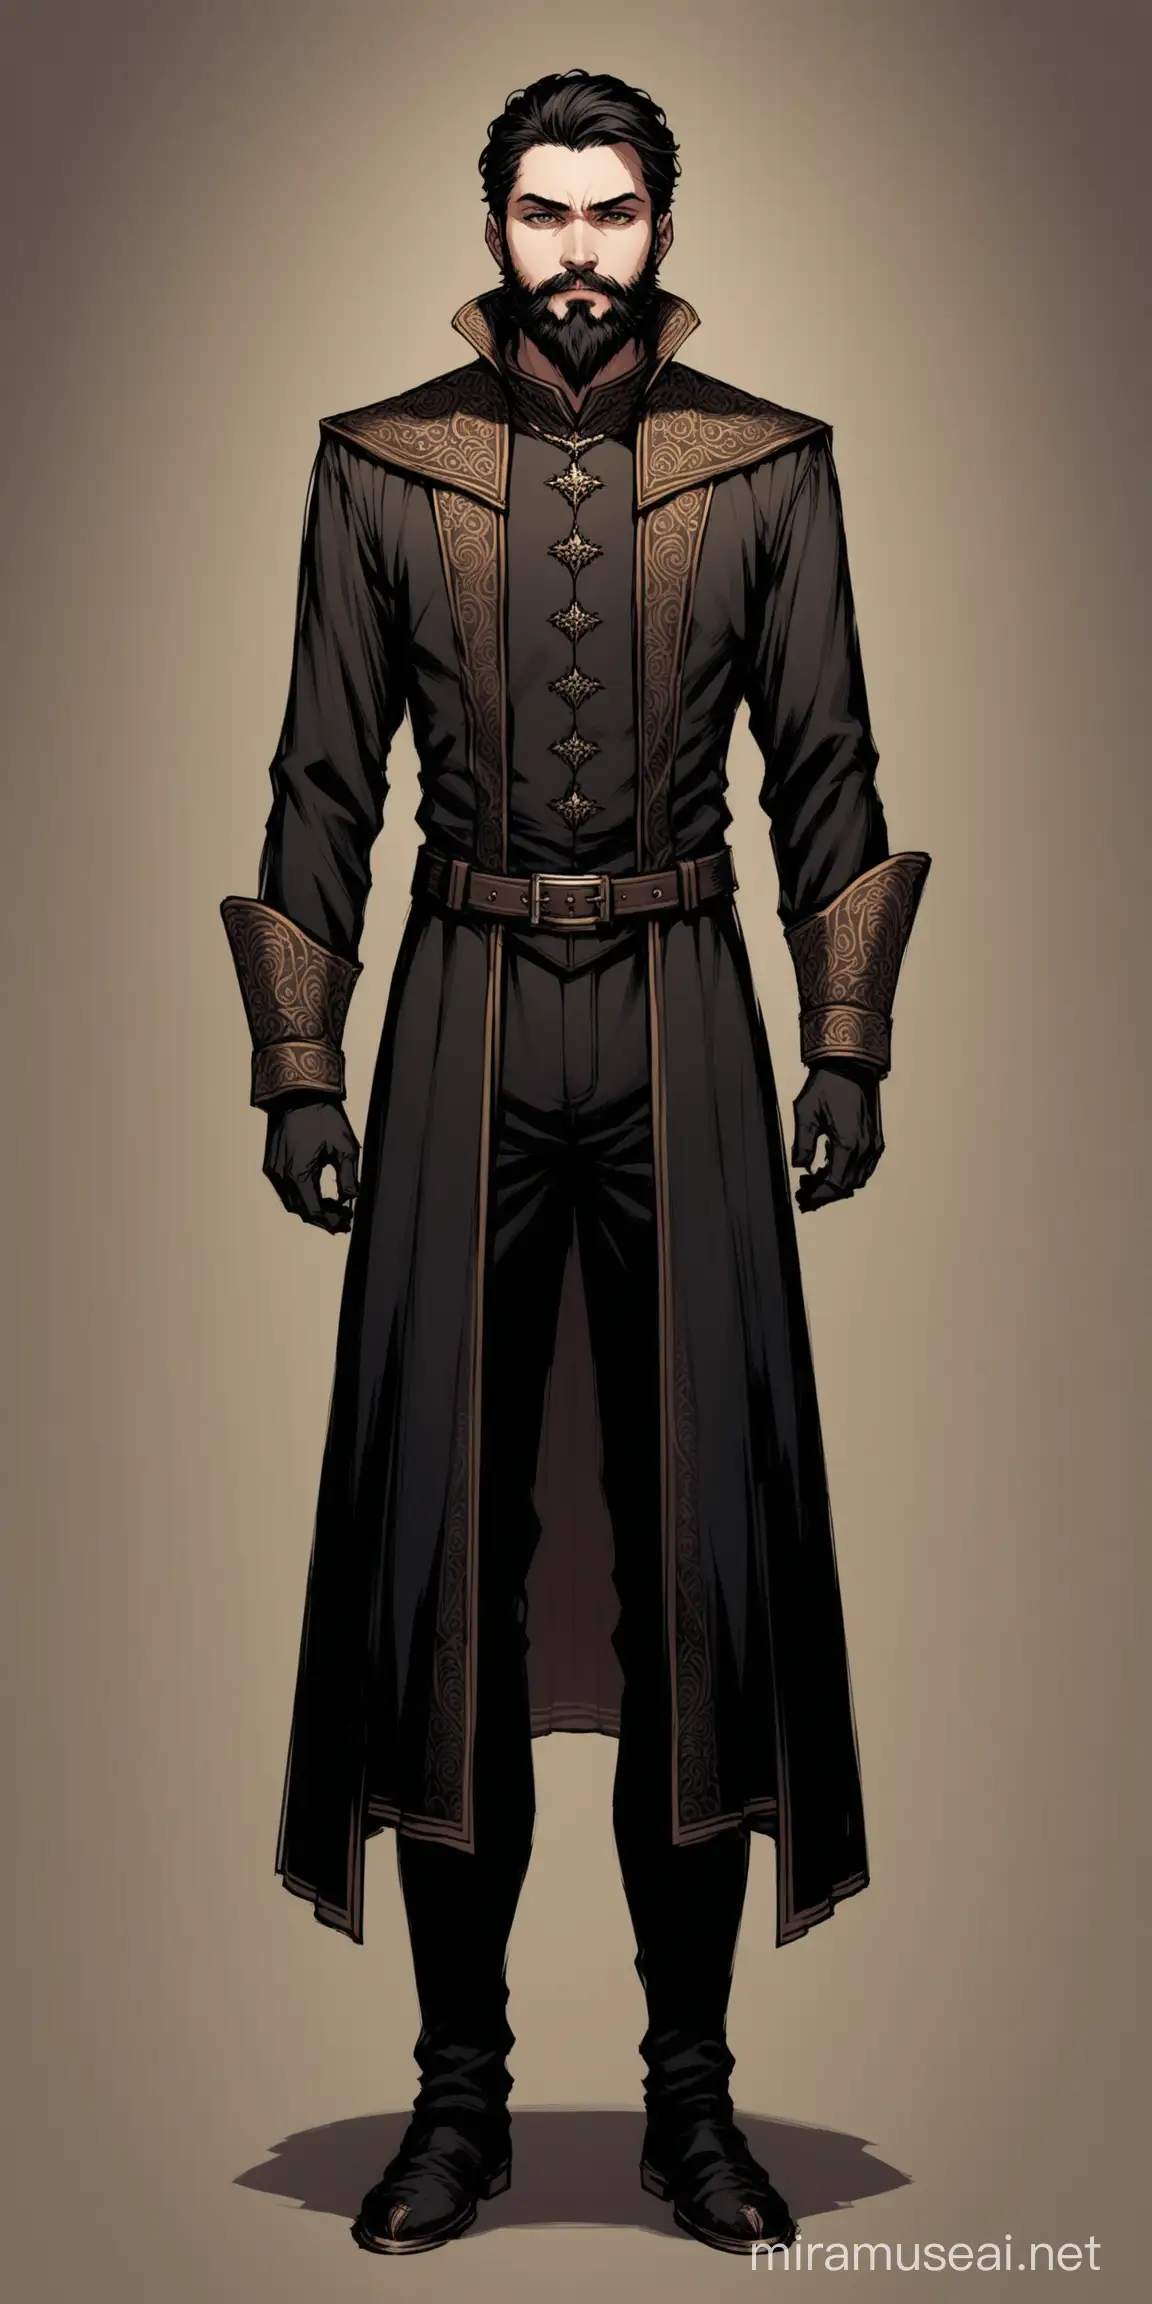 Full body shot. A sinister noble with short dark hair and short neatly trimmed beard. Is about 28 years old. 